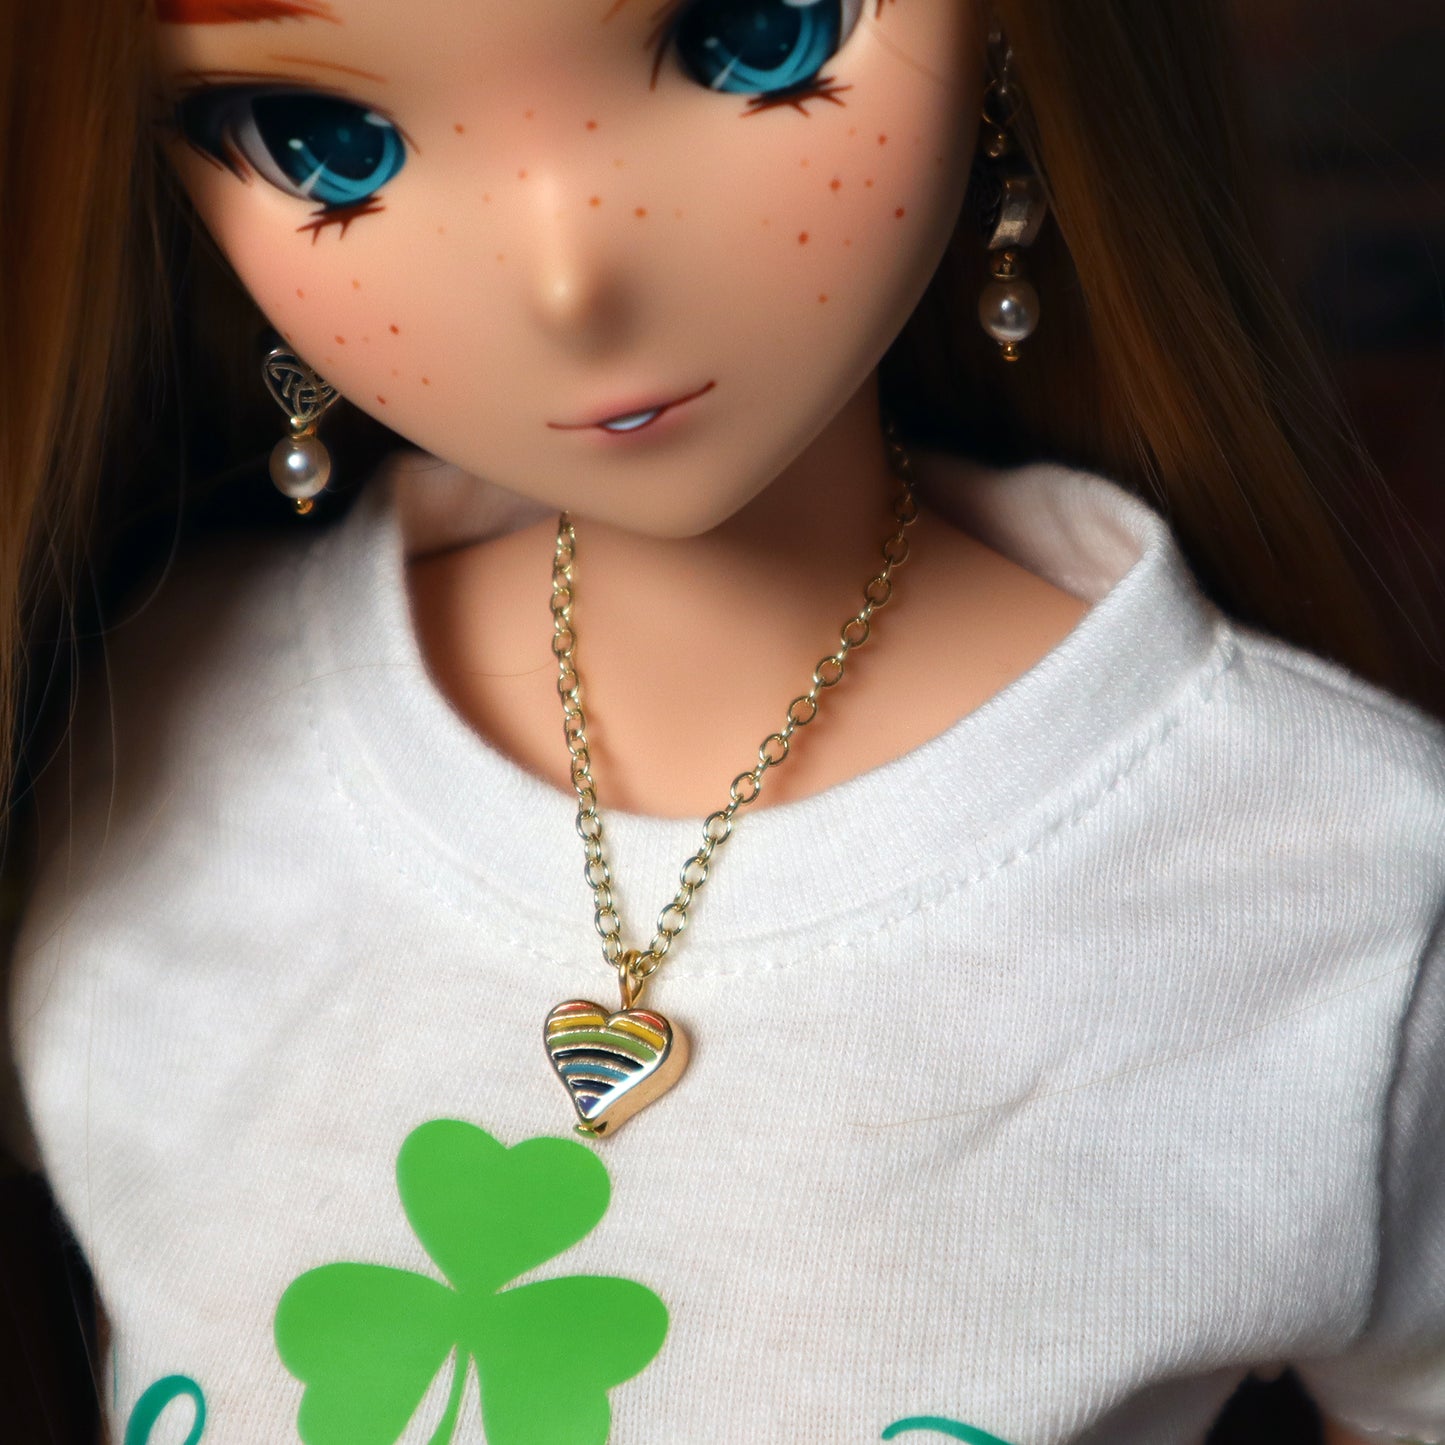 Magentic Clasp Necklace for BJD - Over the Rainbow - Gold or Silver